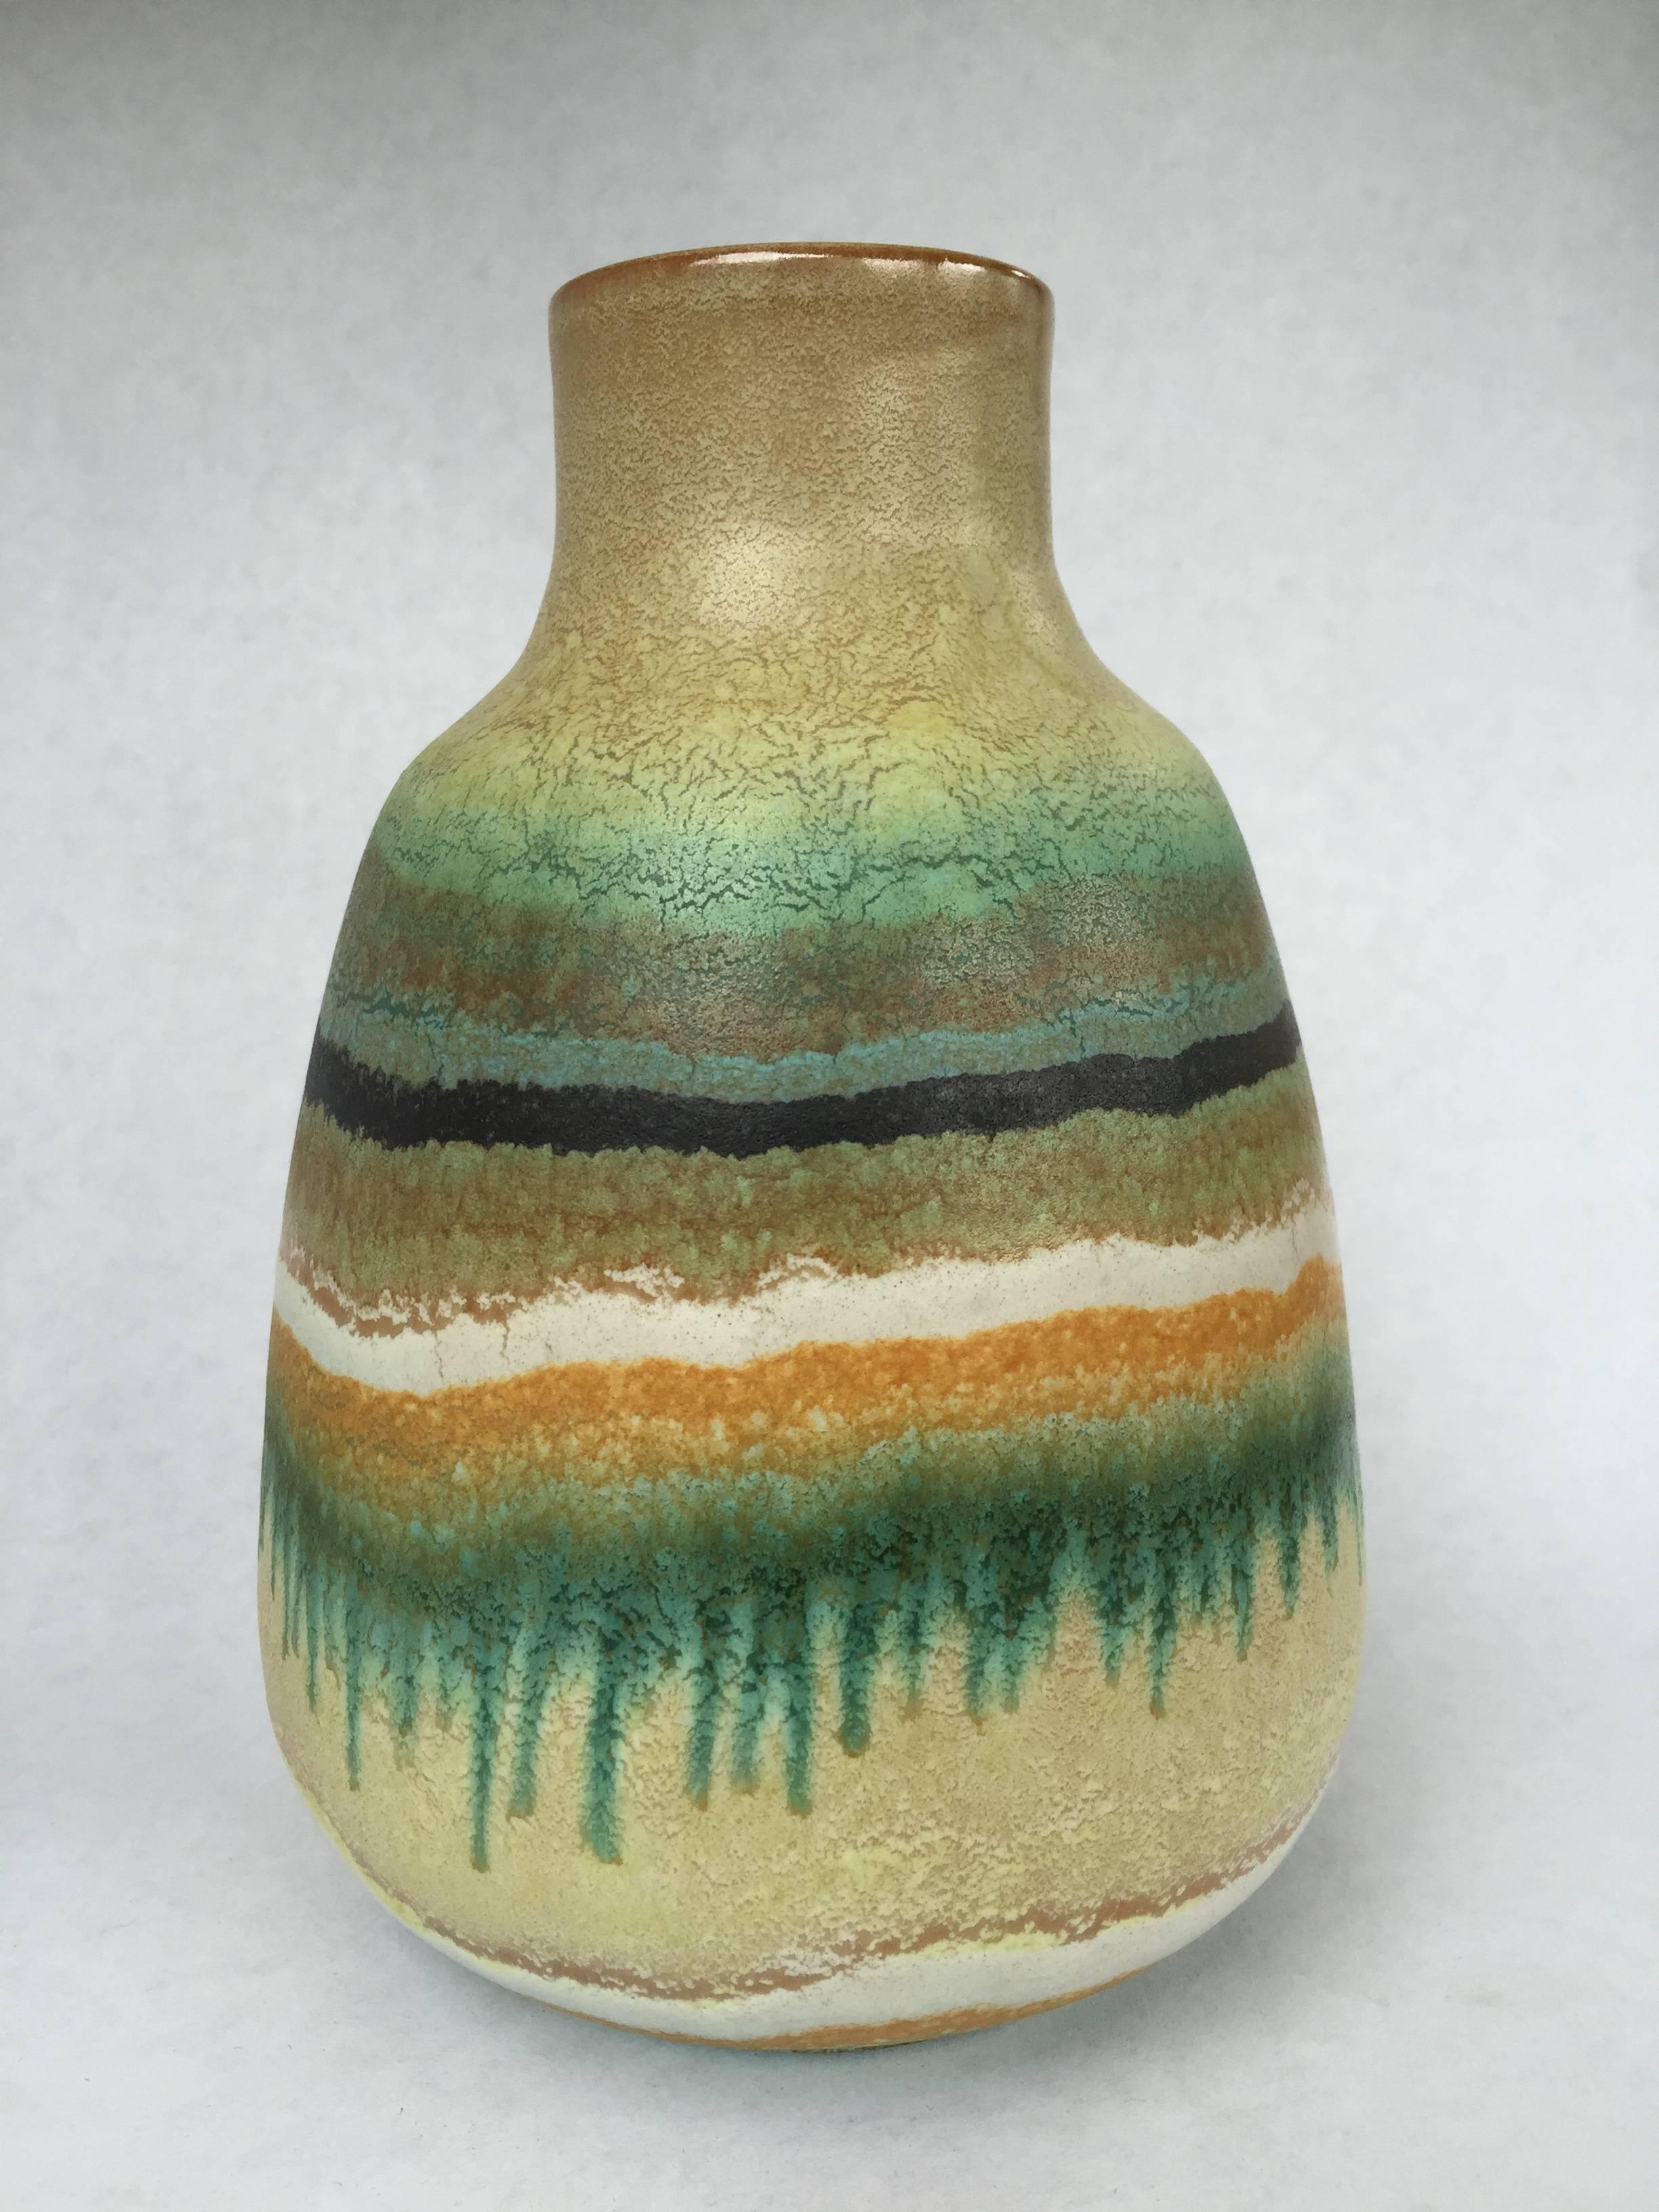 Beautiful matte finish drip glaze pottery vase signed Alvino Bagni. Fully signed on the bottom, A Bagni, Italy. Excellent and original condition.